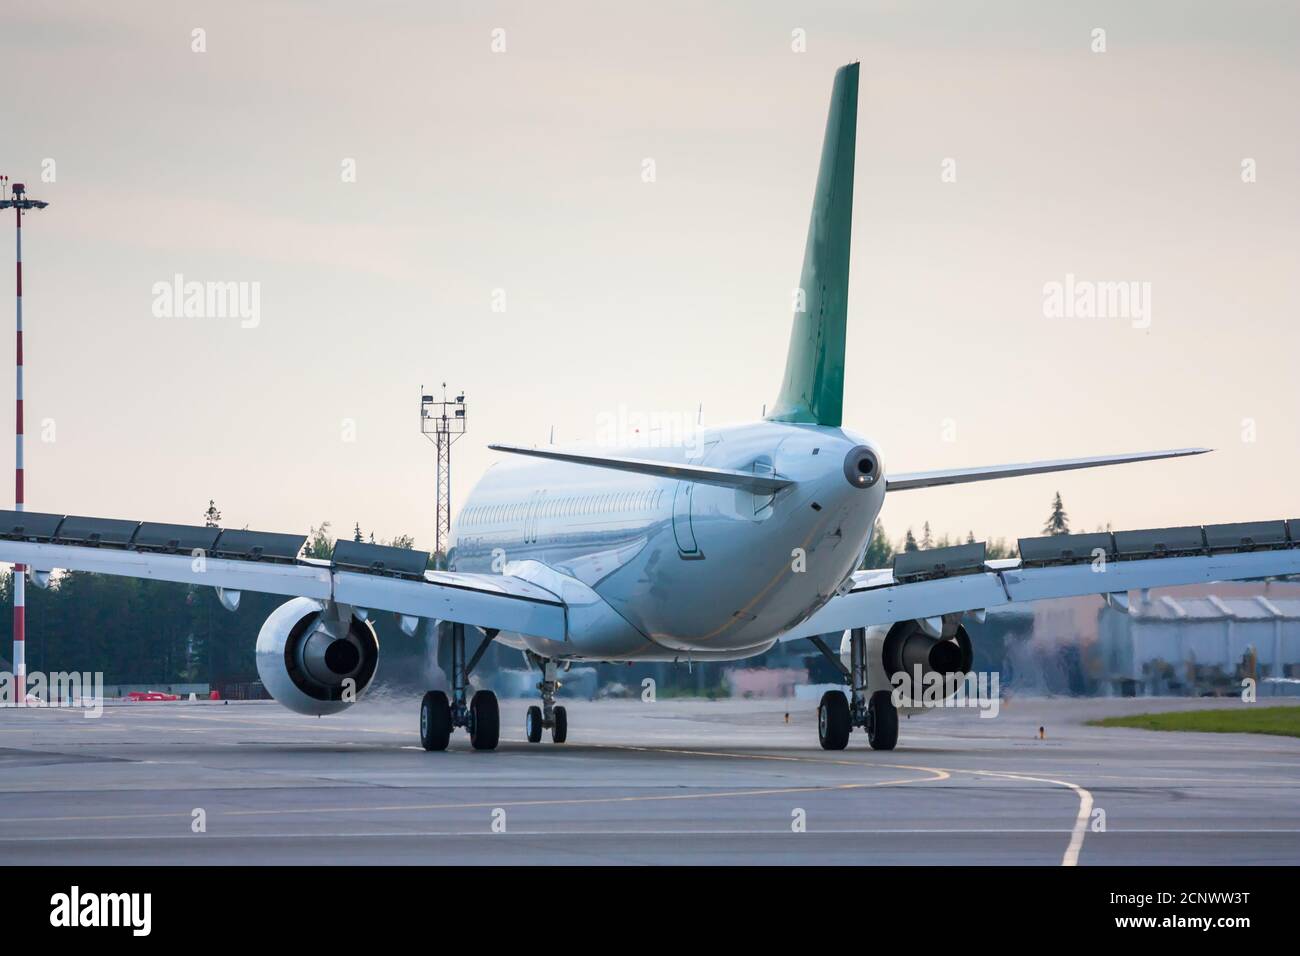 Taxiing aircraft with extended spoilers Stock Photo